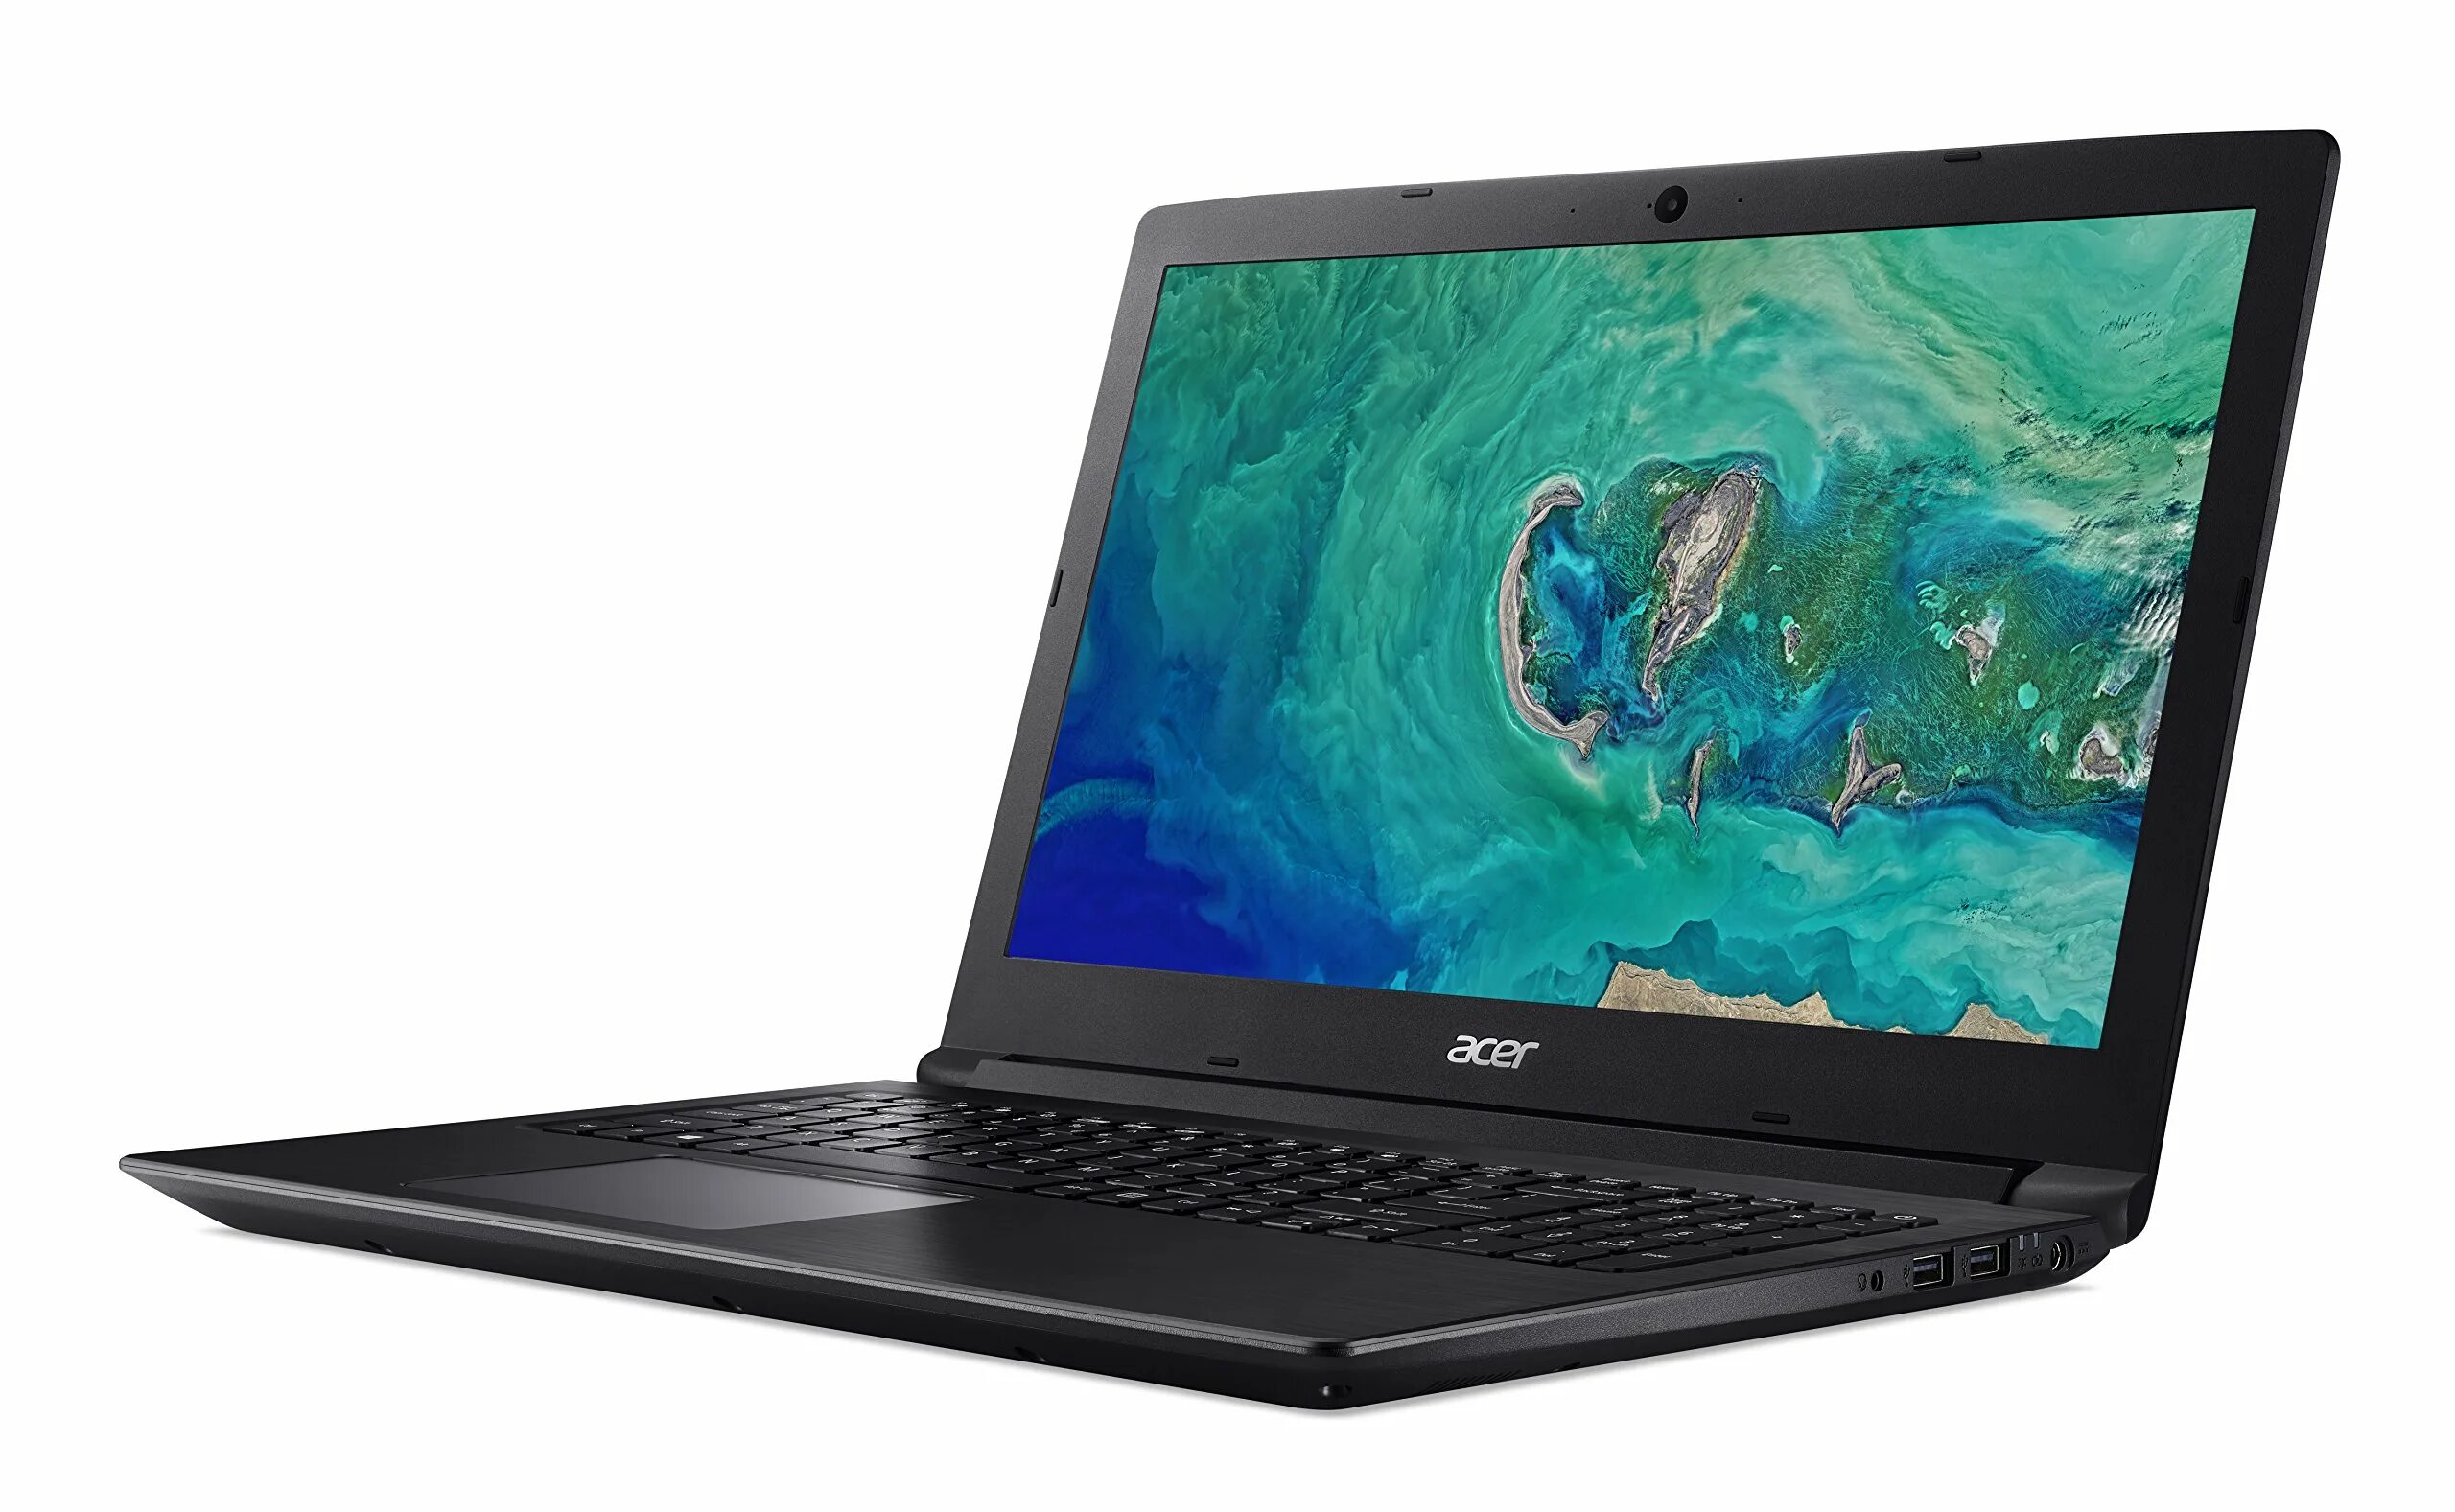 Ноутбук acer aspire 3 silver. Acer Swift 7. Ультрабук Acer Swift. Ноутбук Асер Свифт 7. Acer Spin 1 sp111-32n.